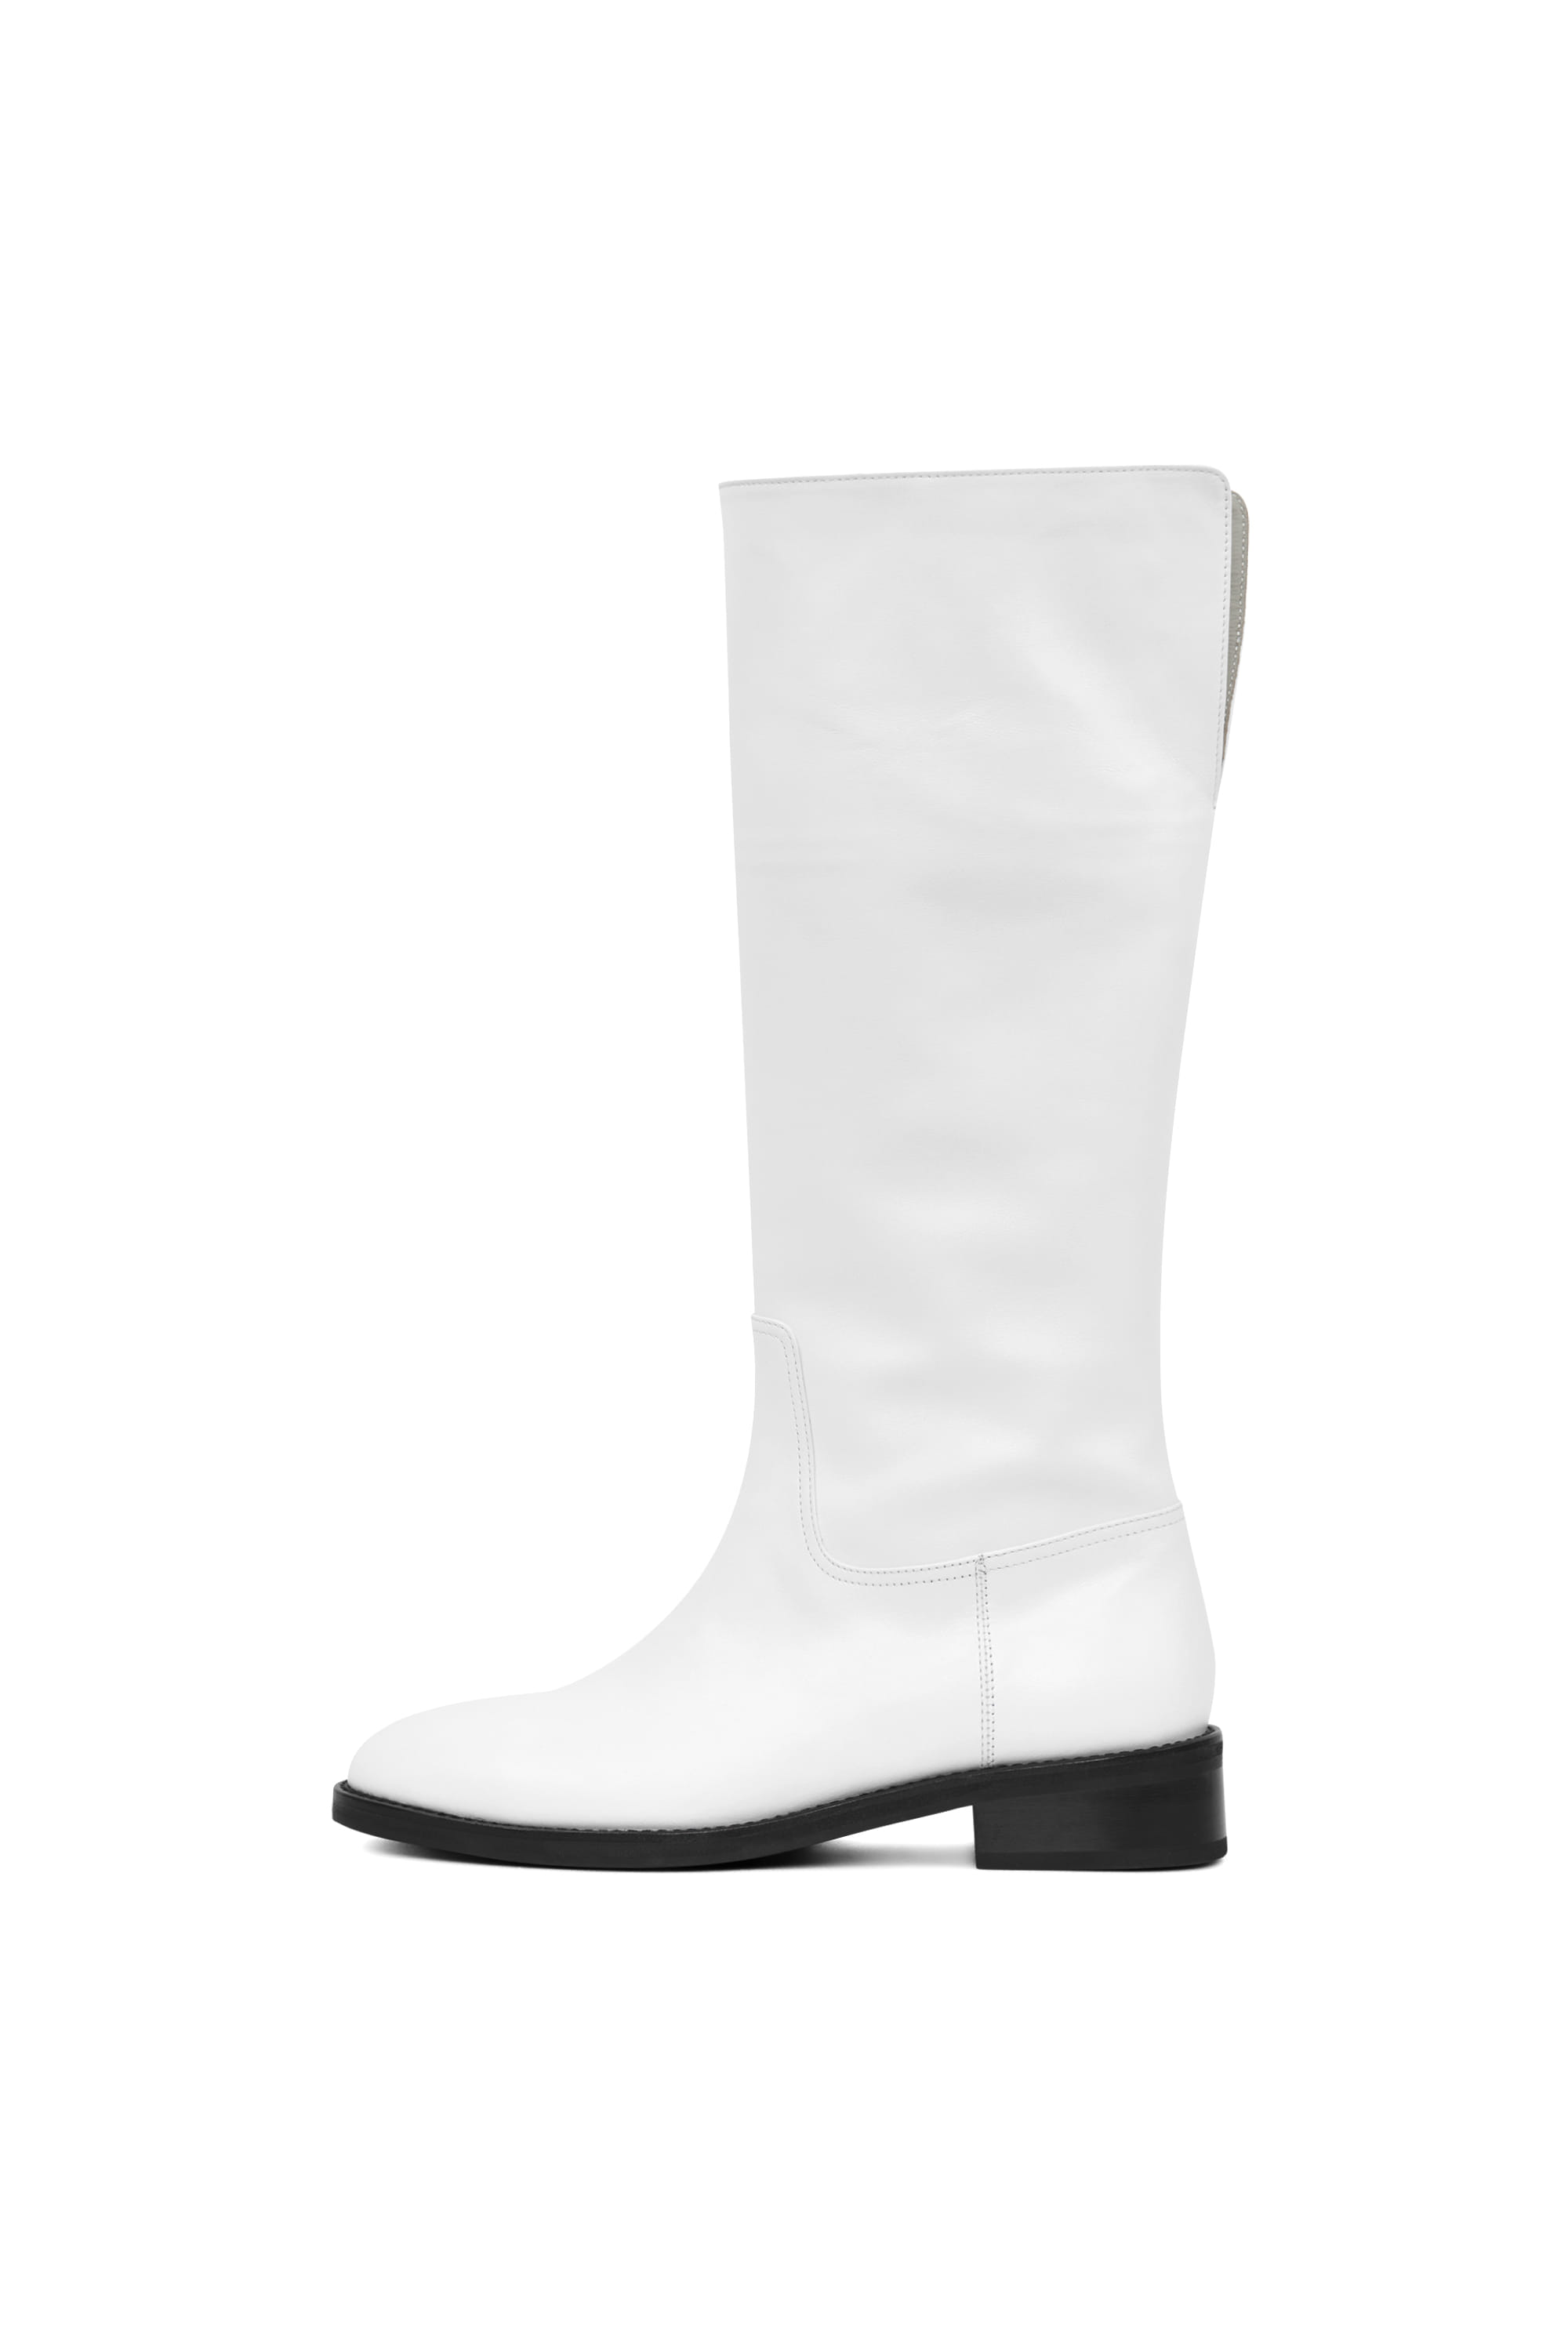 WEATHER FOLDED BOOTS_WHITE/GRAY